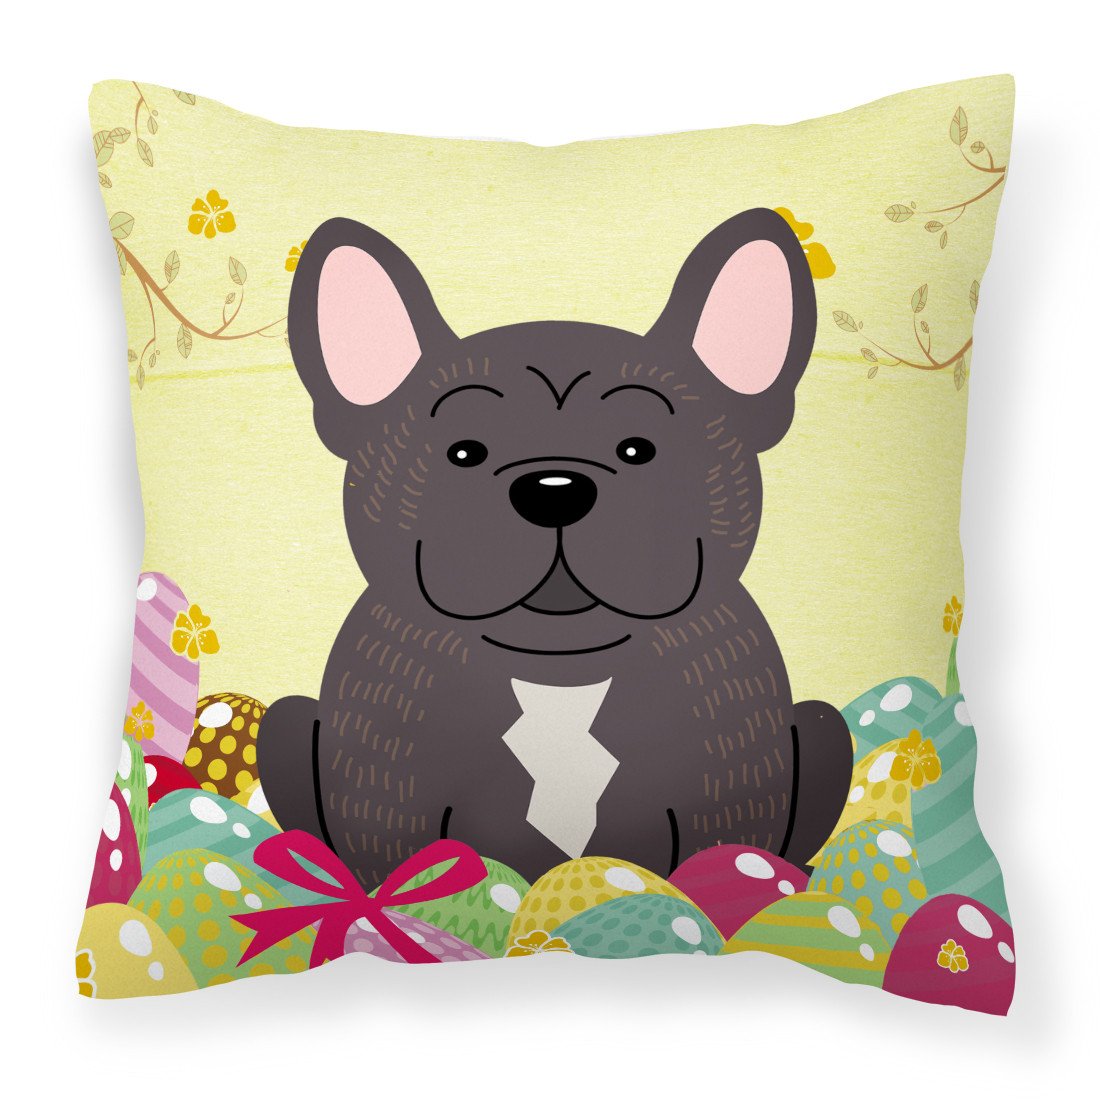 Easter Eggs French Bulldog Brindle Fabric Decorative Pillow BB6009PW1818 by Caroline's Treasures